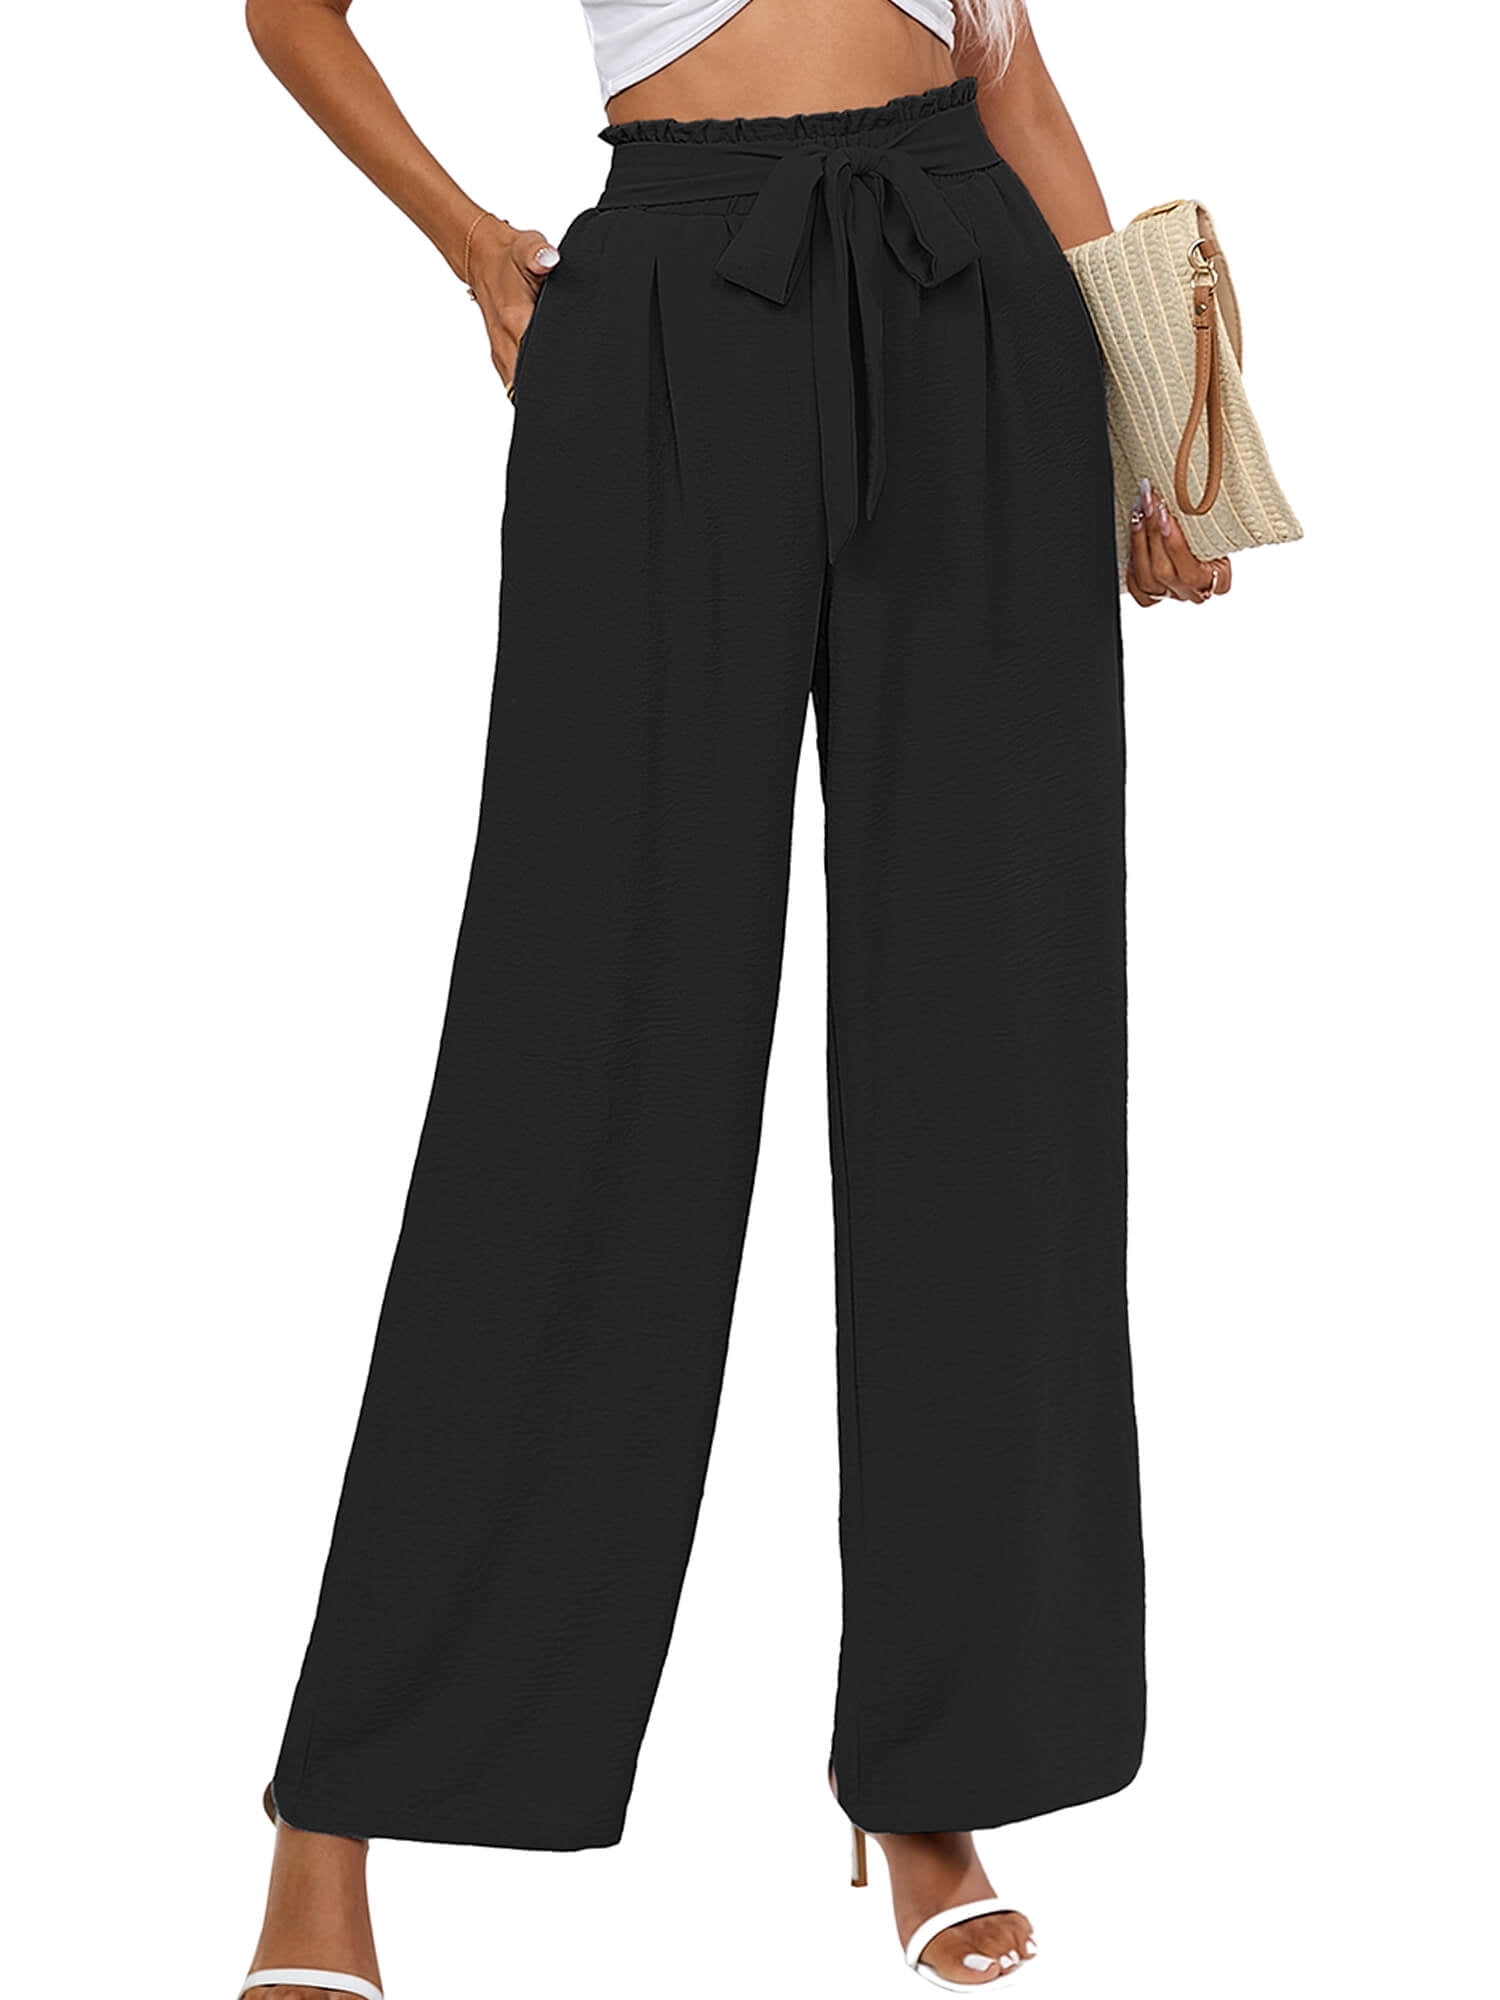 Women's Casual Pants Slim Fit Bow Tie Waist Pants with Pocket for Work  Business 2PC Set at Amazon Women's Clothing store